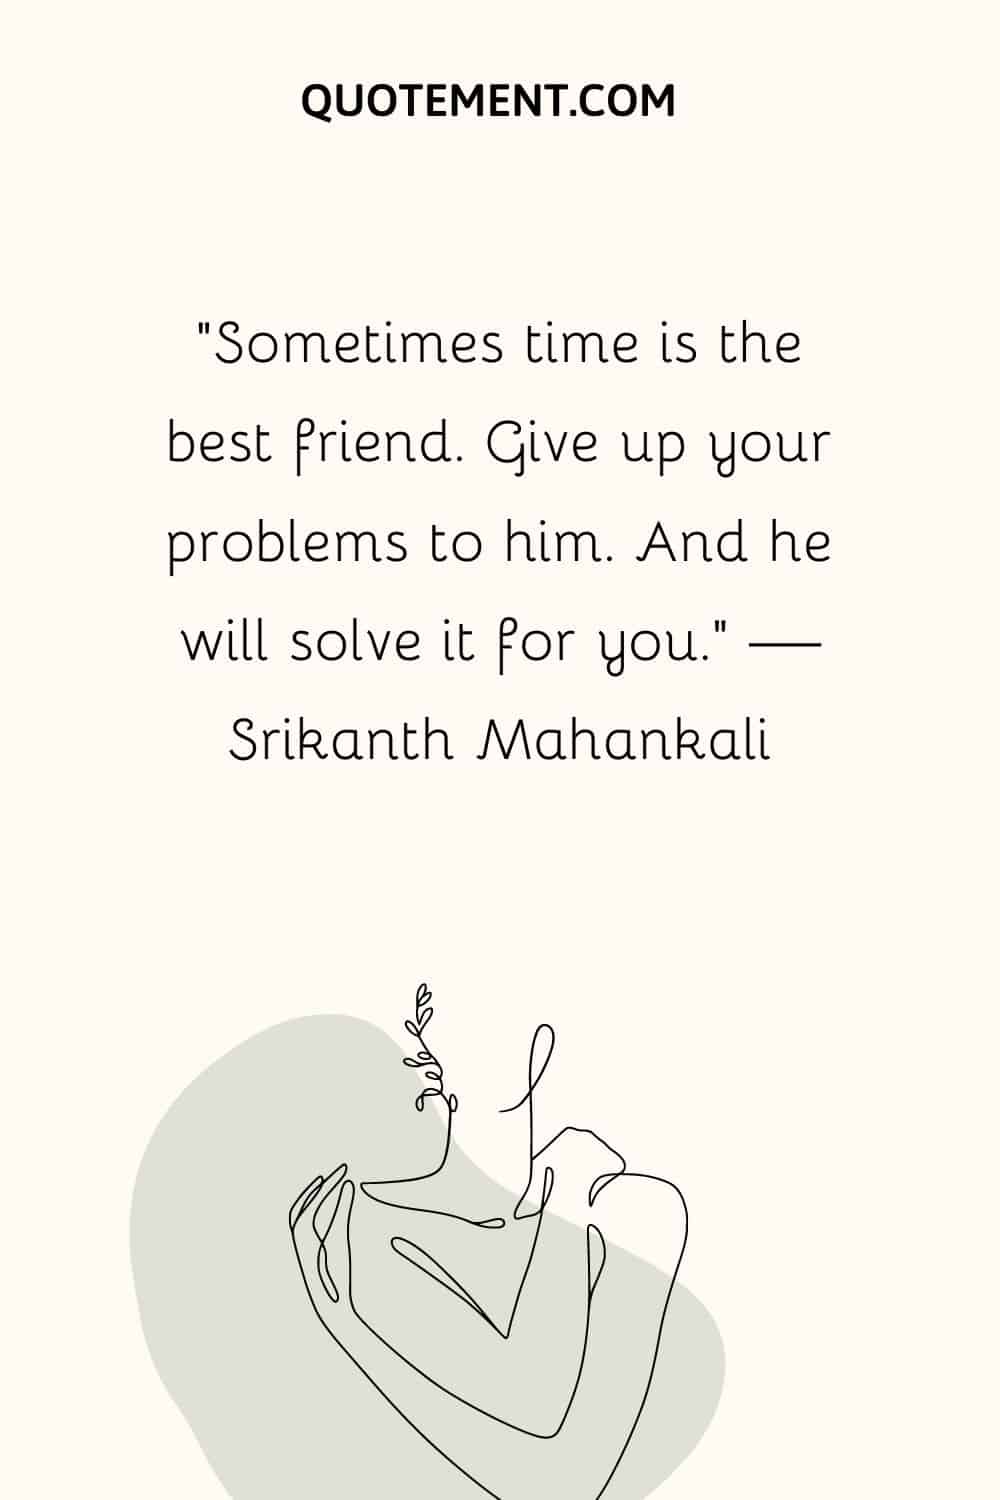 “Sometimes time is the best friend. Give up your problems to him. And he will solve it for you.” — Srikanth Mahankali